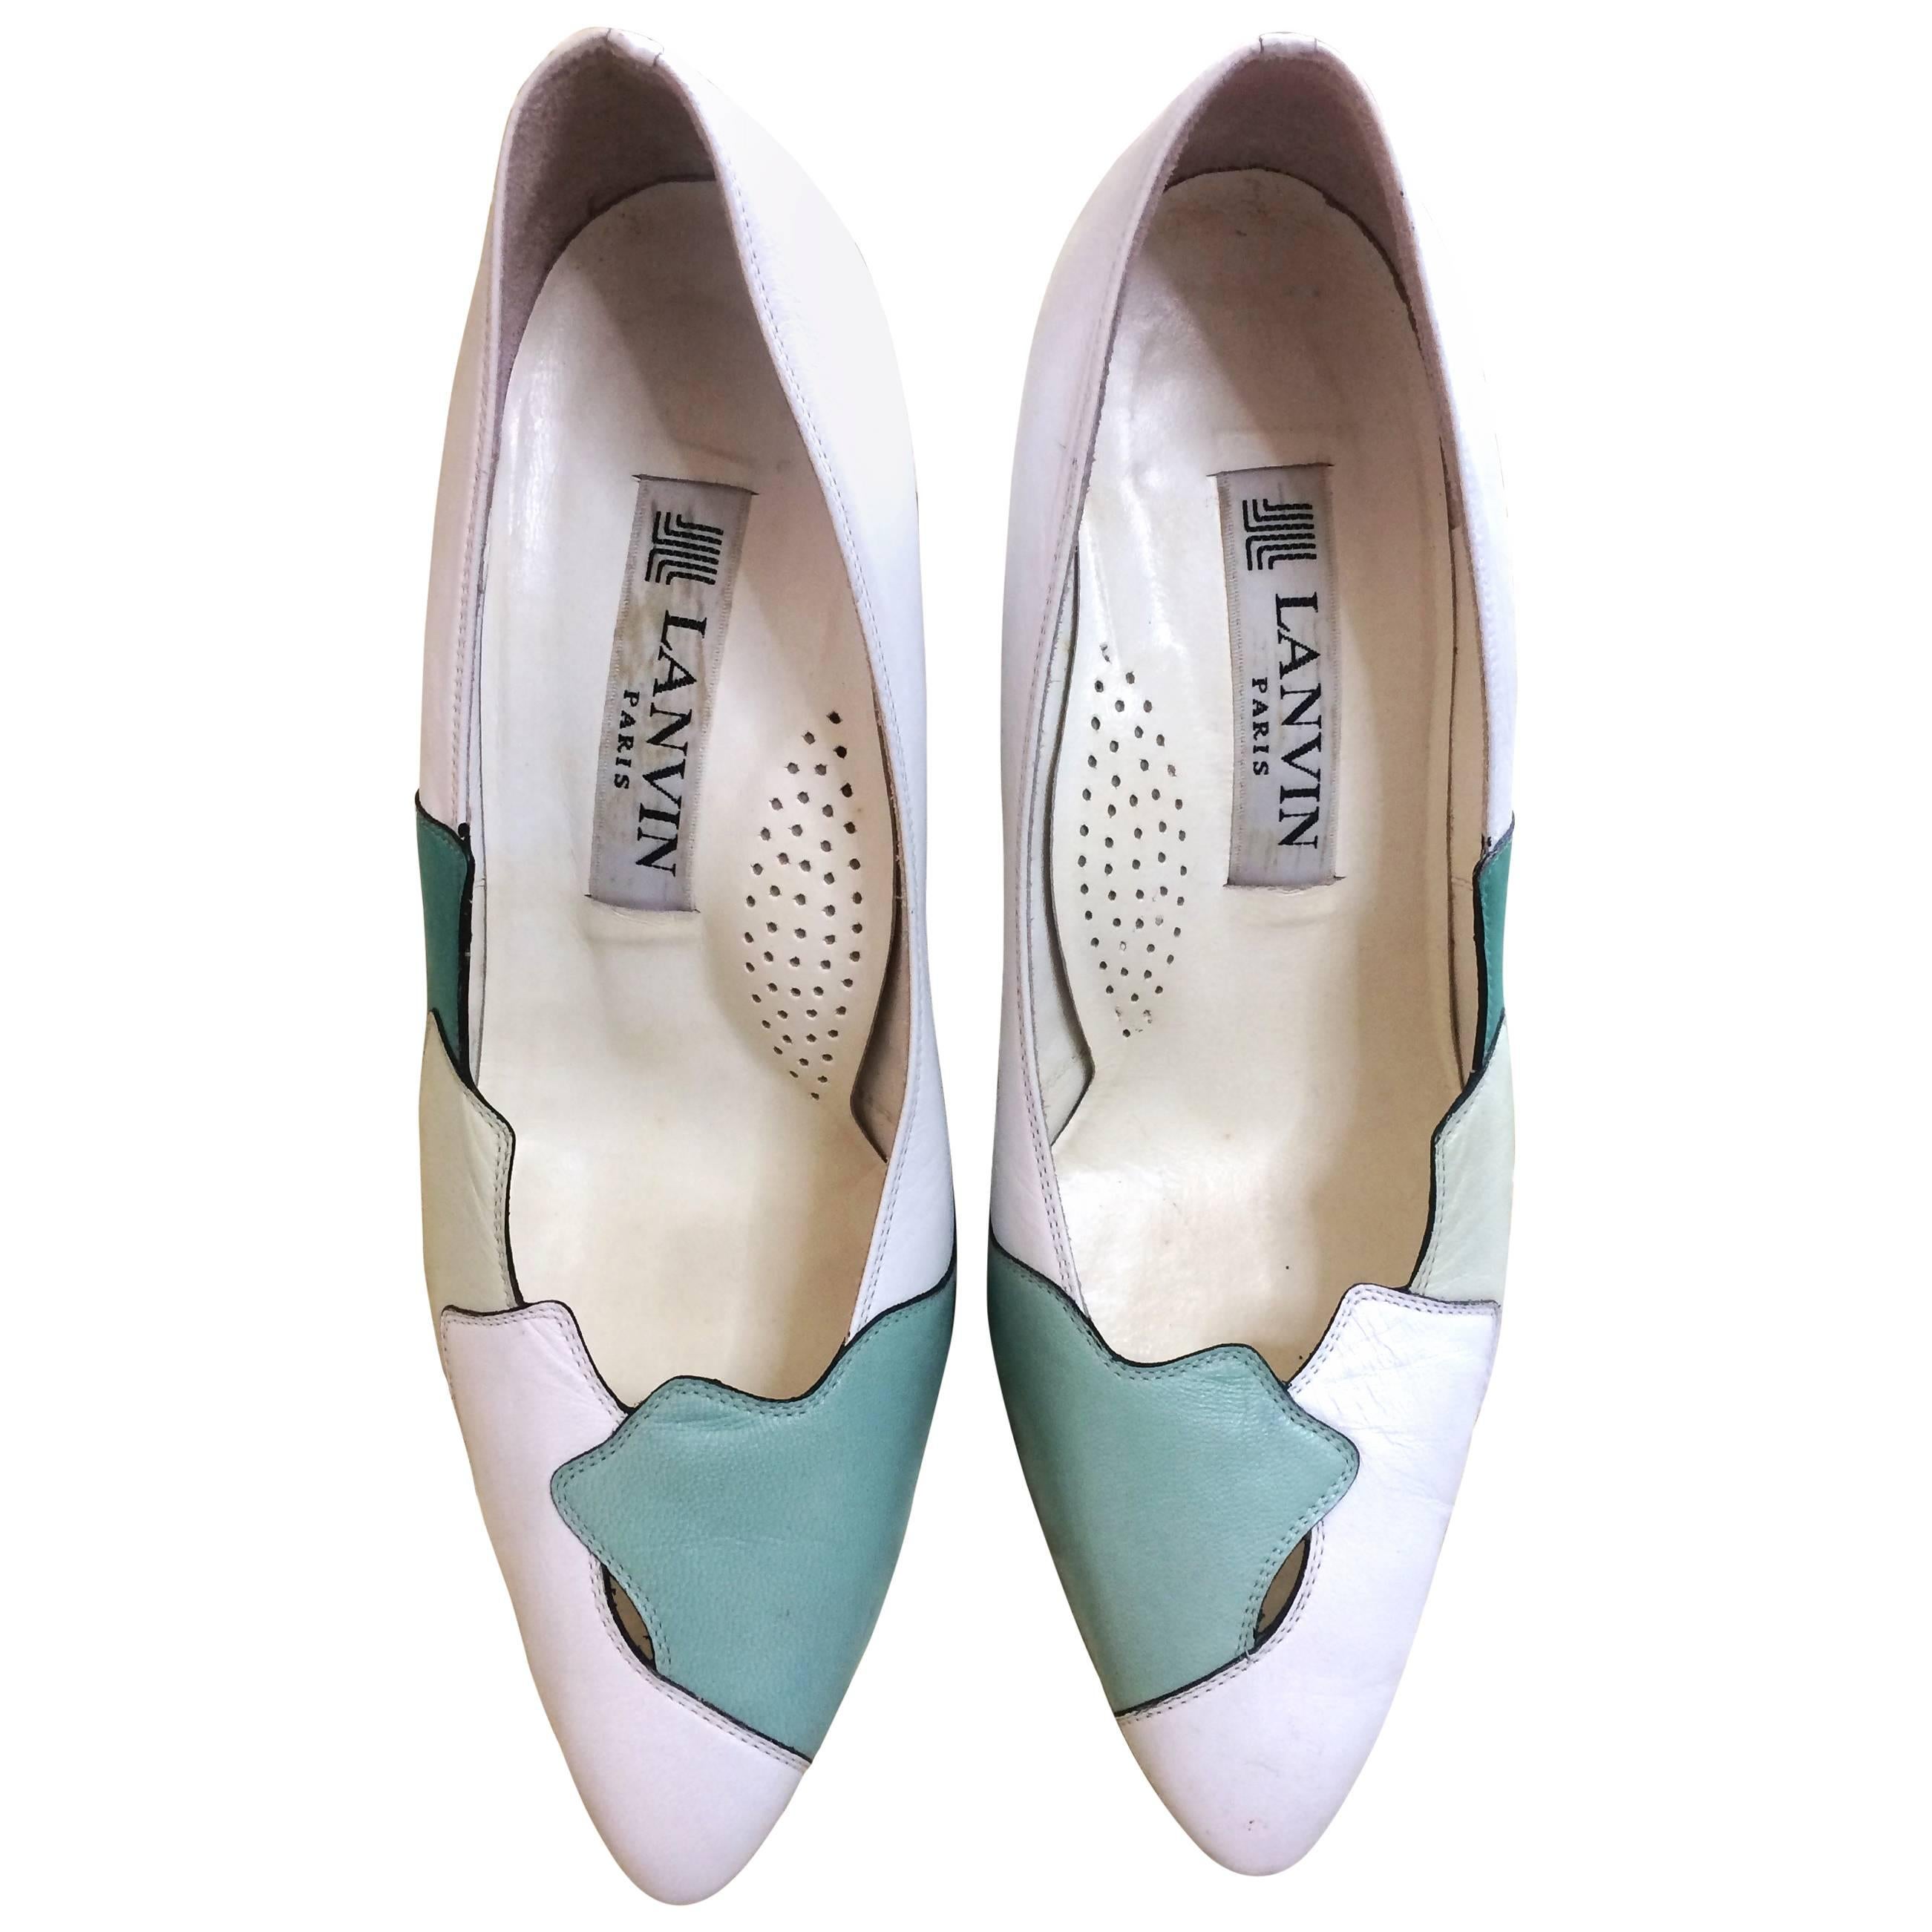 Vintage LANVIN white, light green, and green layered leather shoes, pumps. 6-6.5